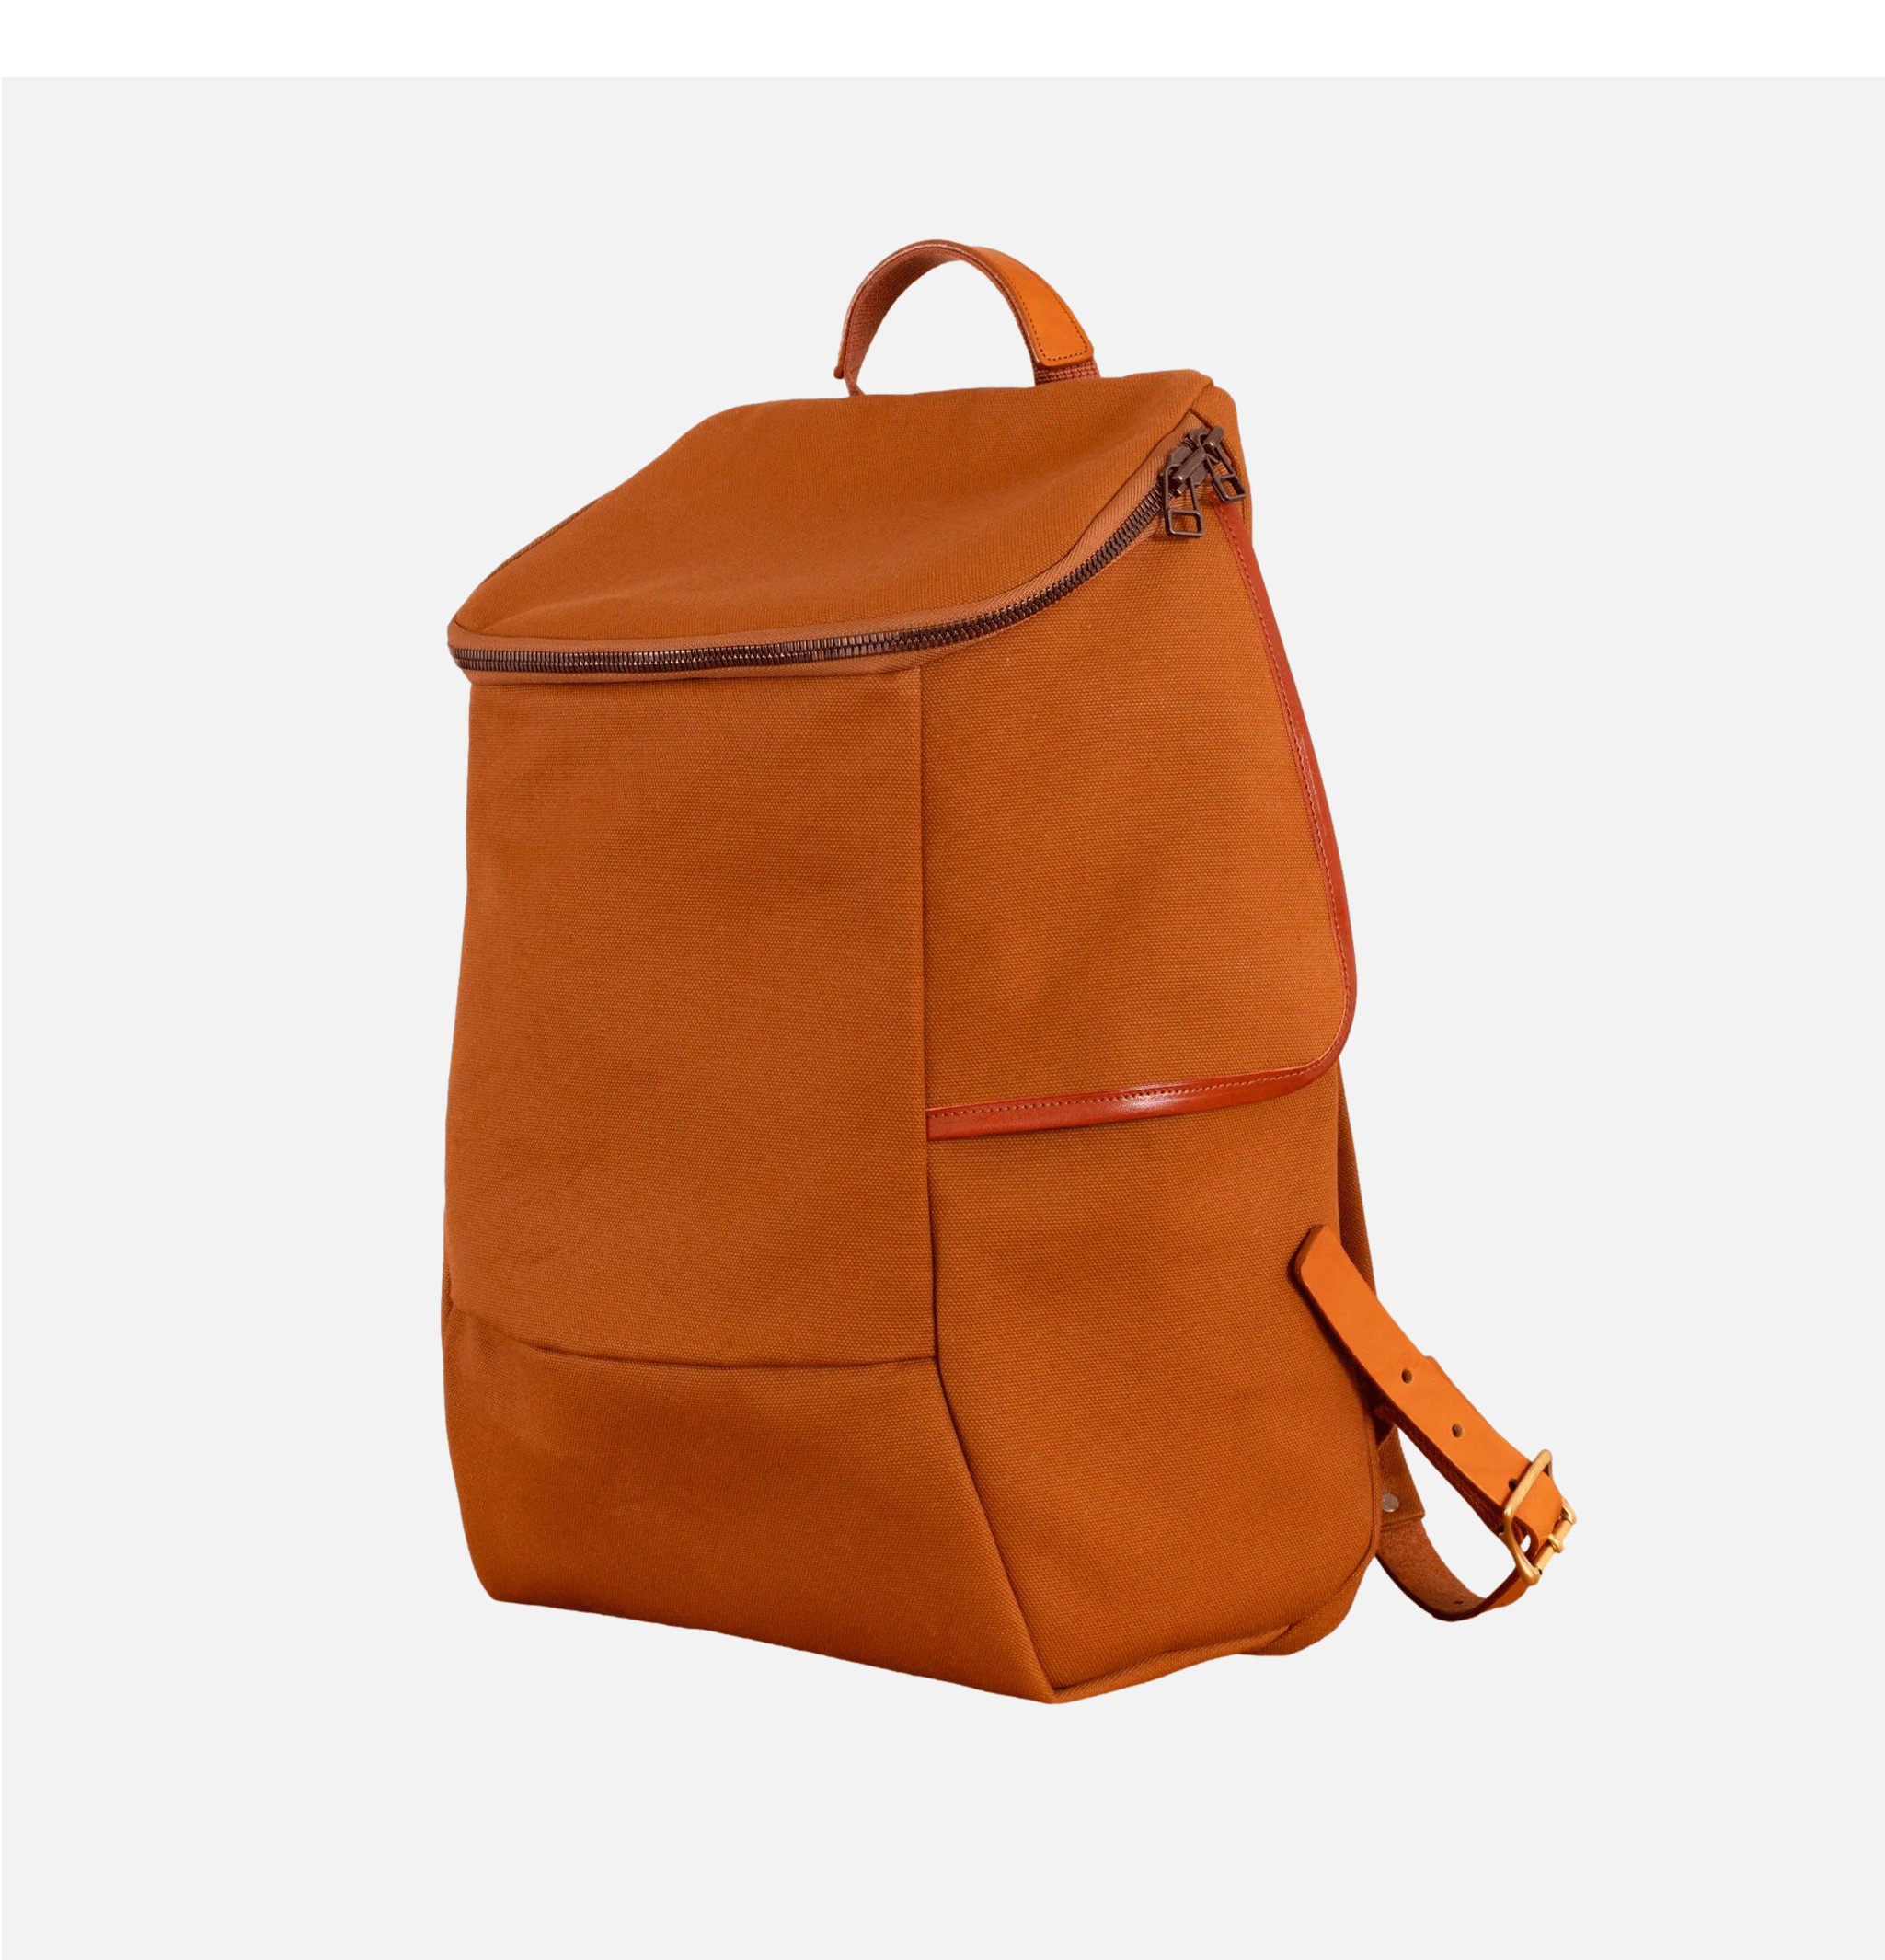 Southern Field Backpack Persimmon Orange